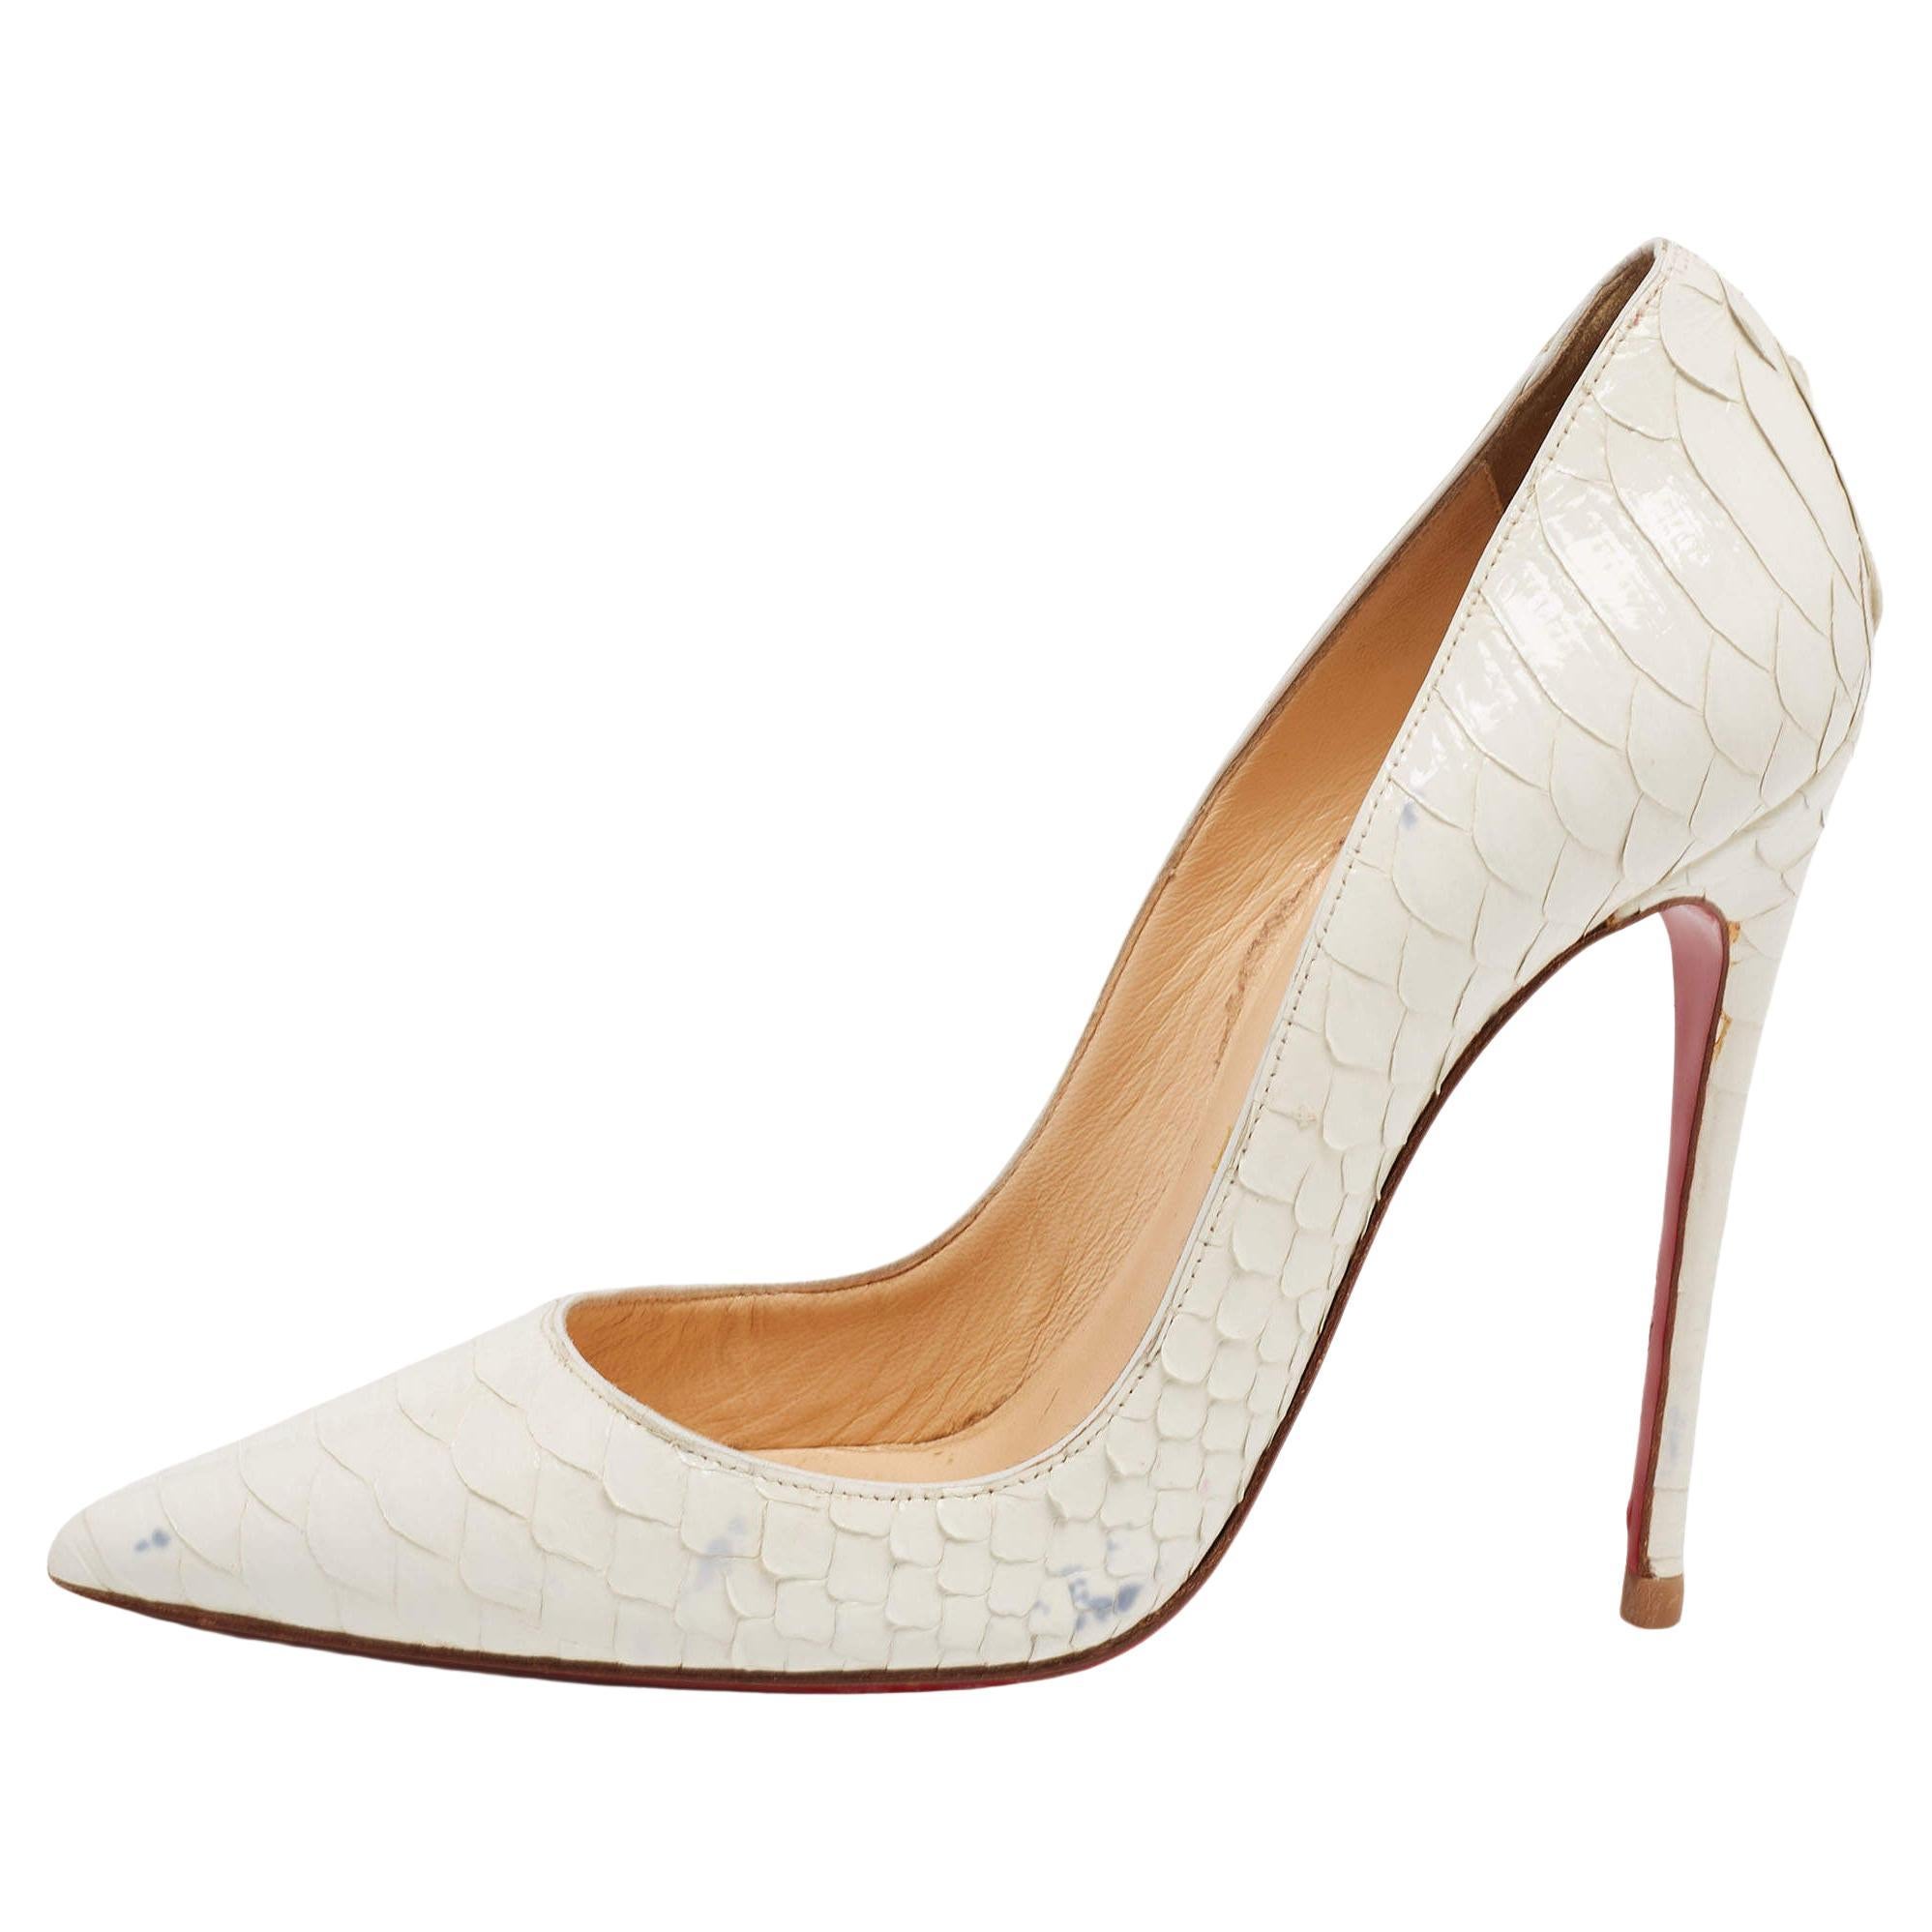 Christian Louboutin White Python Patent Leather So Kate Pumps Size 37.5 For Sale